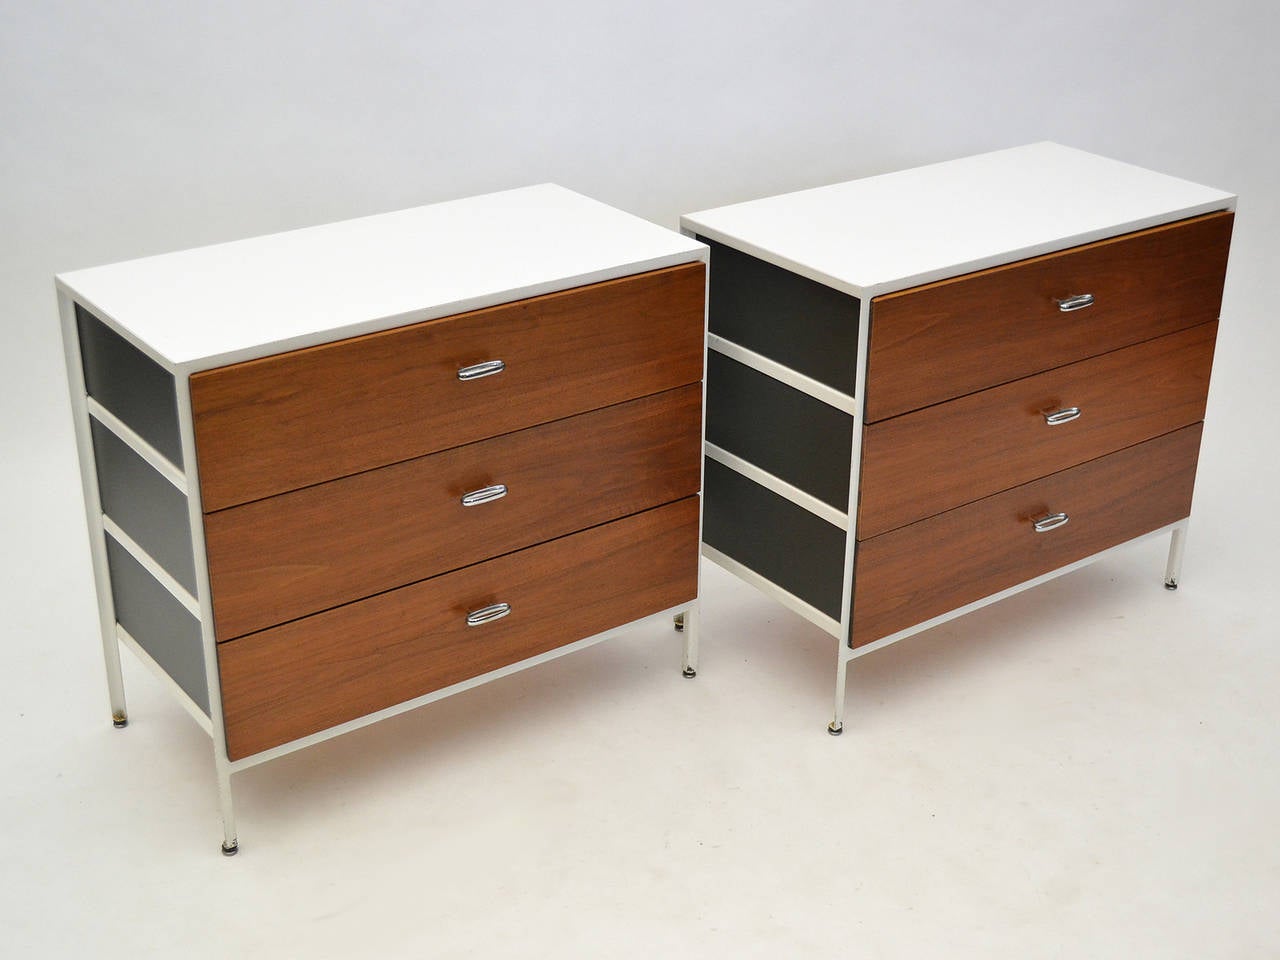 Enameled Pair of George Nelson Steel Frame Chests by Herman Miller